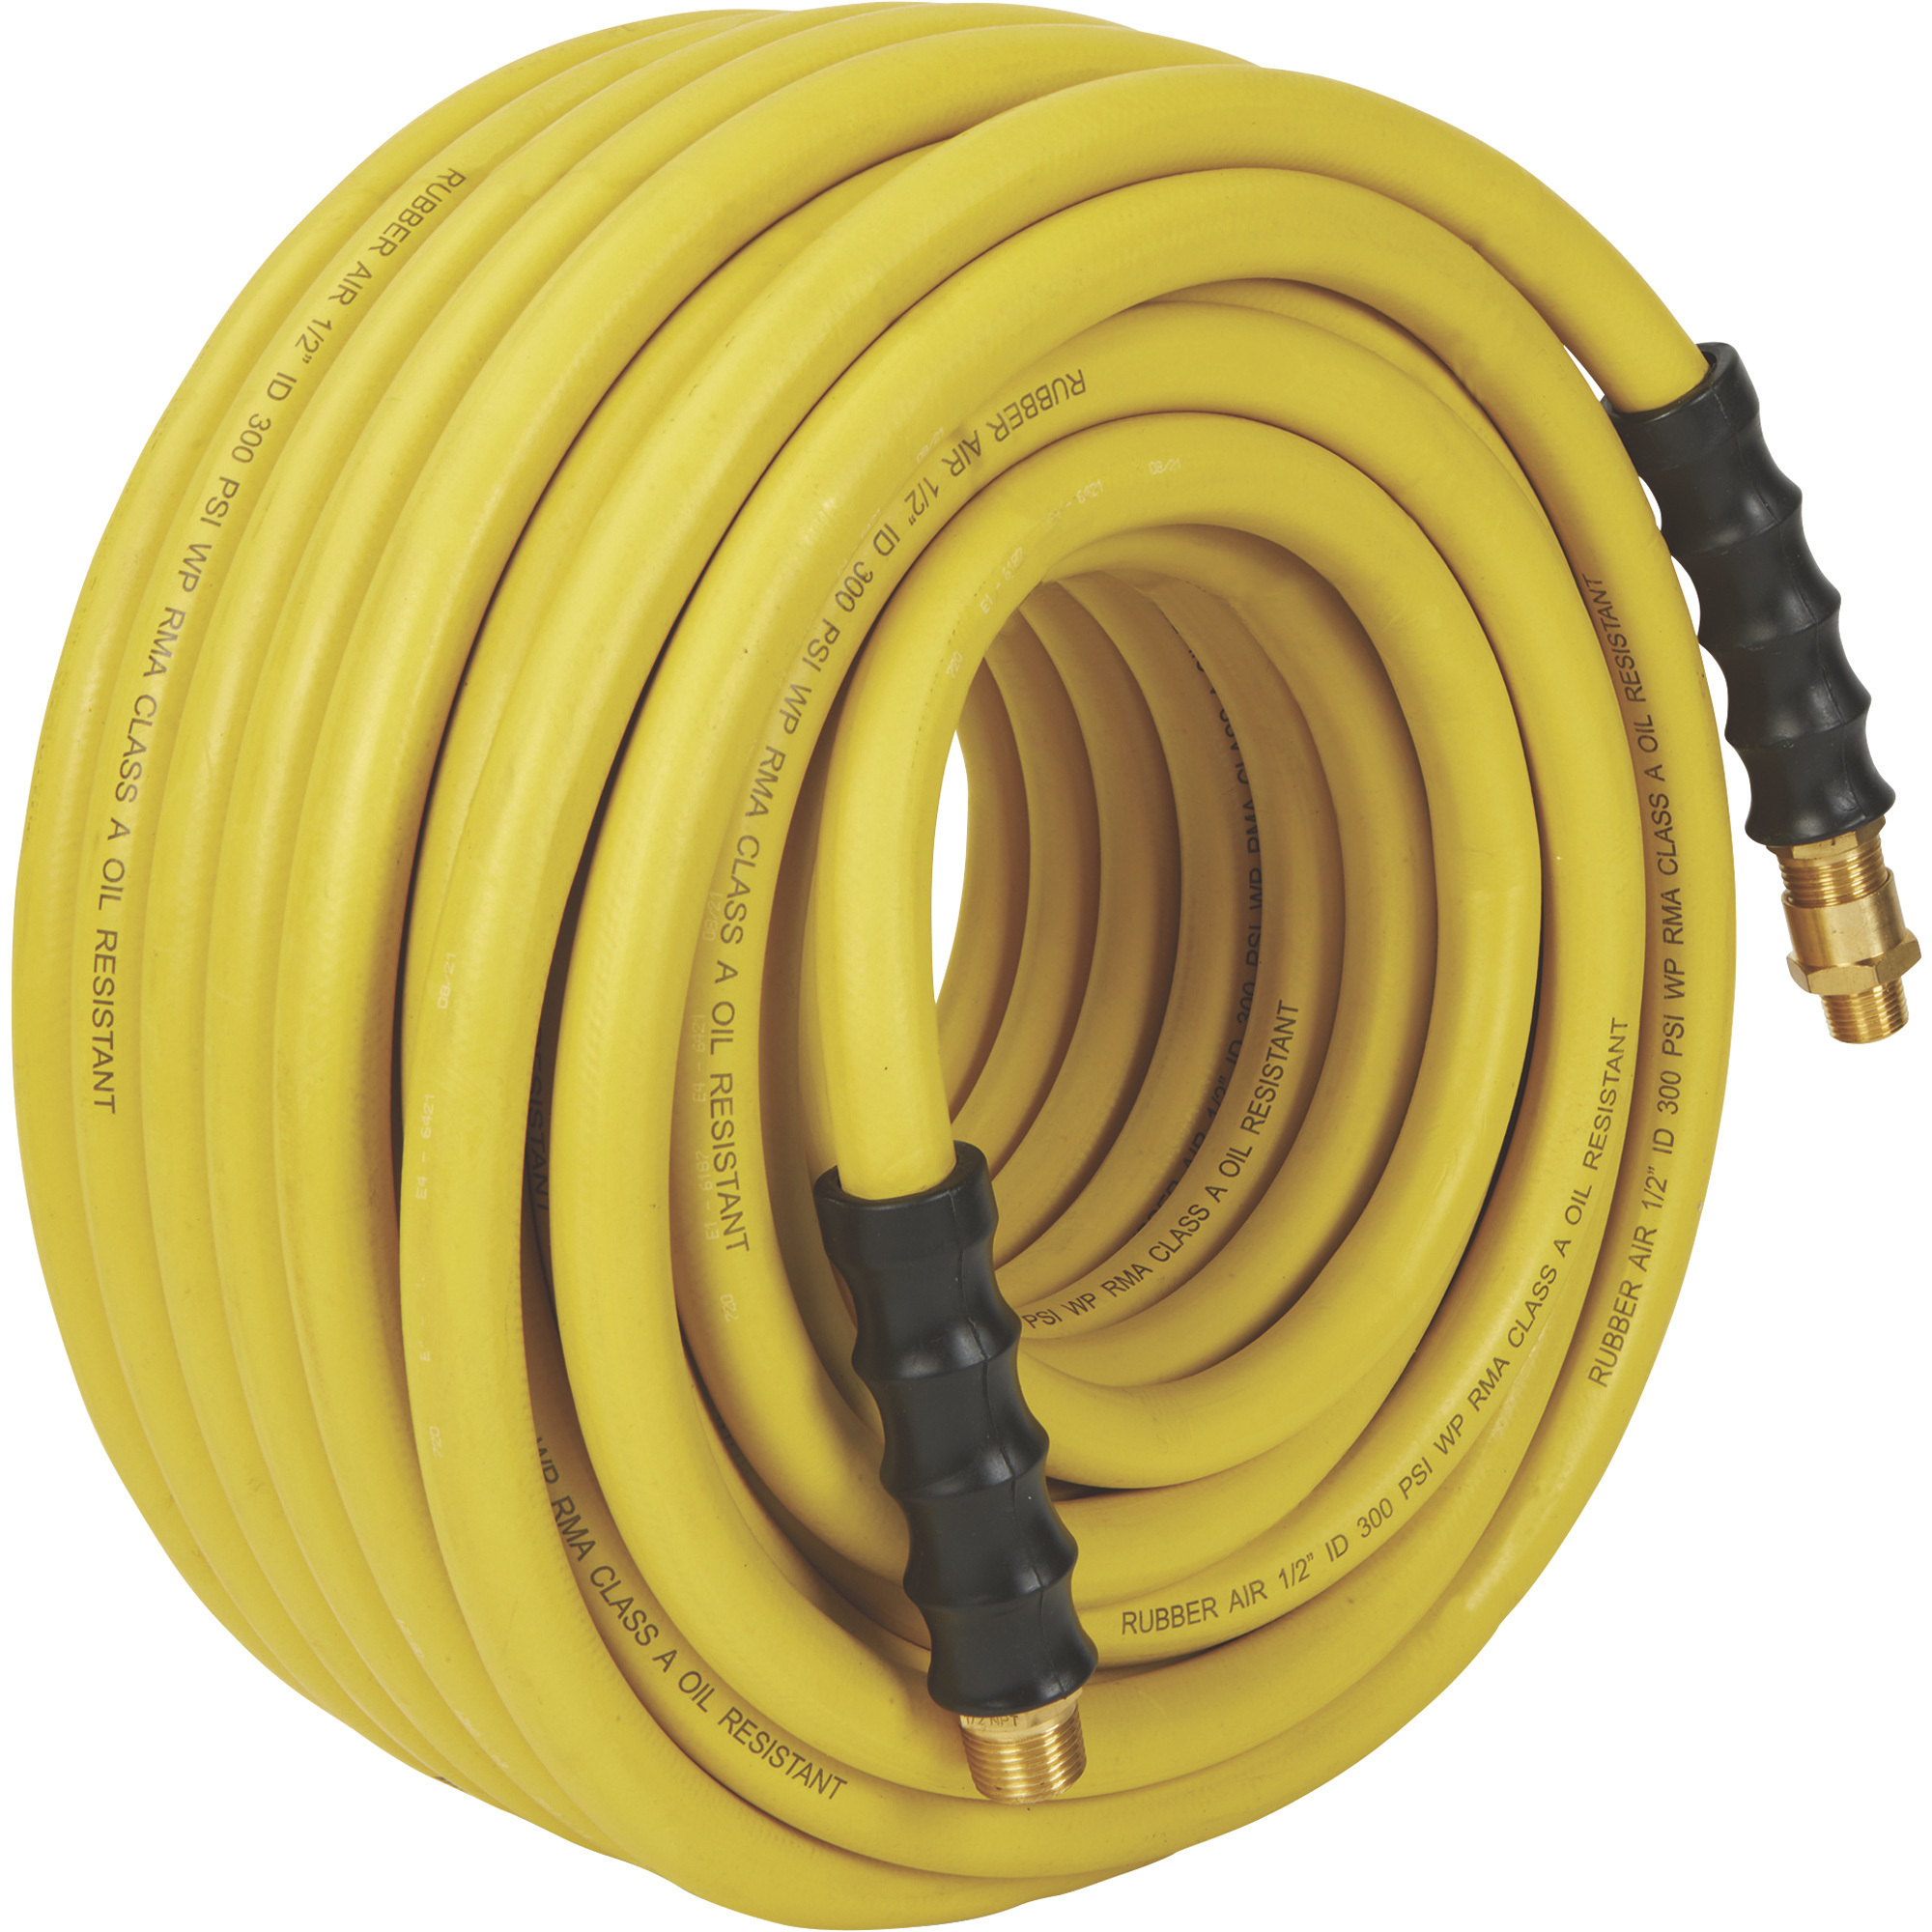 Klutch Oil-Resistant Rubber Air Hose, 1/2in. x 50ft., with 1/2in.-3/8in.  Reducer, 300 PSI, Model# OS1250-NT